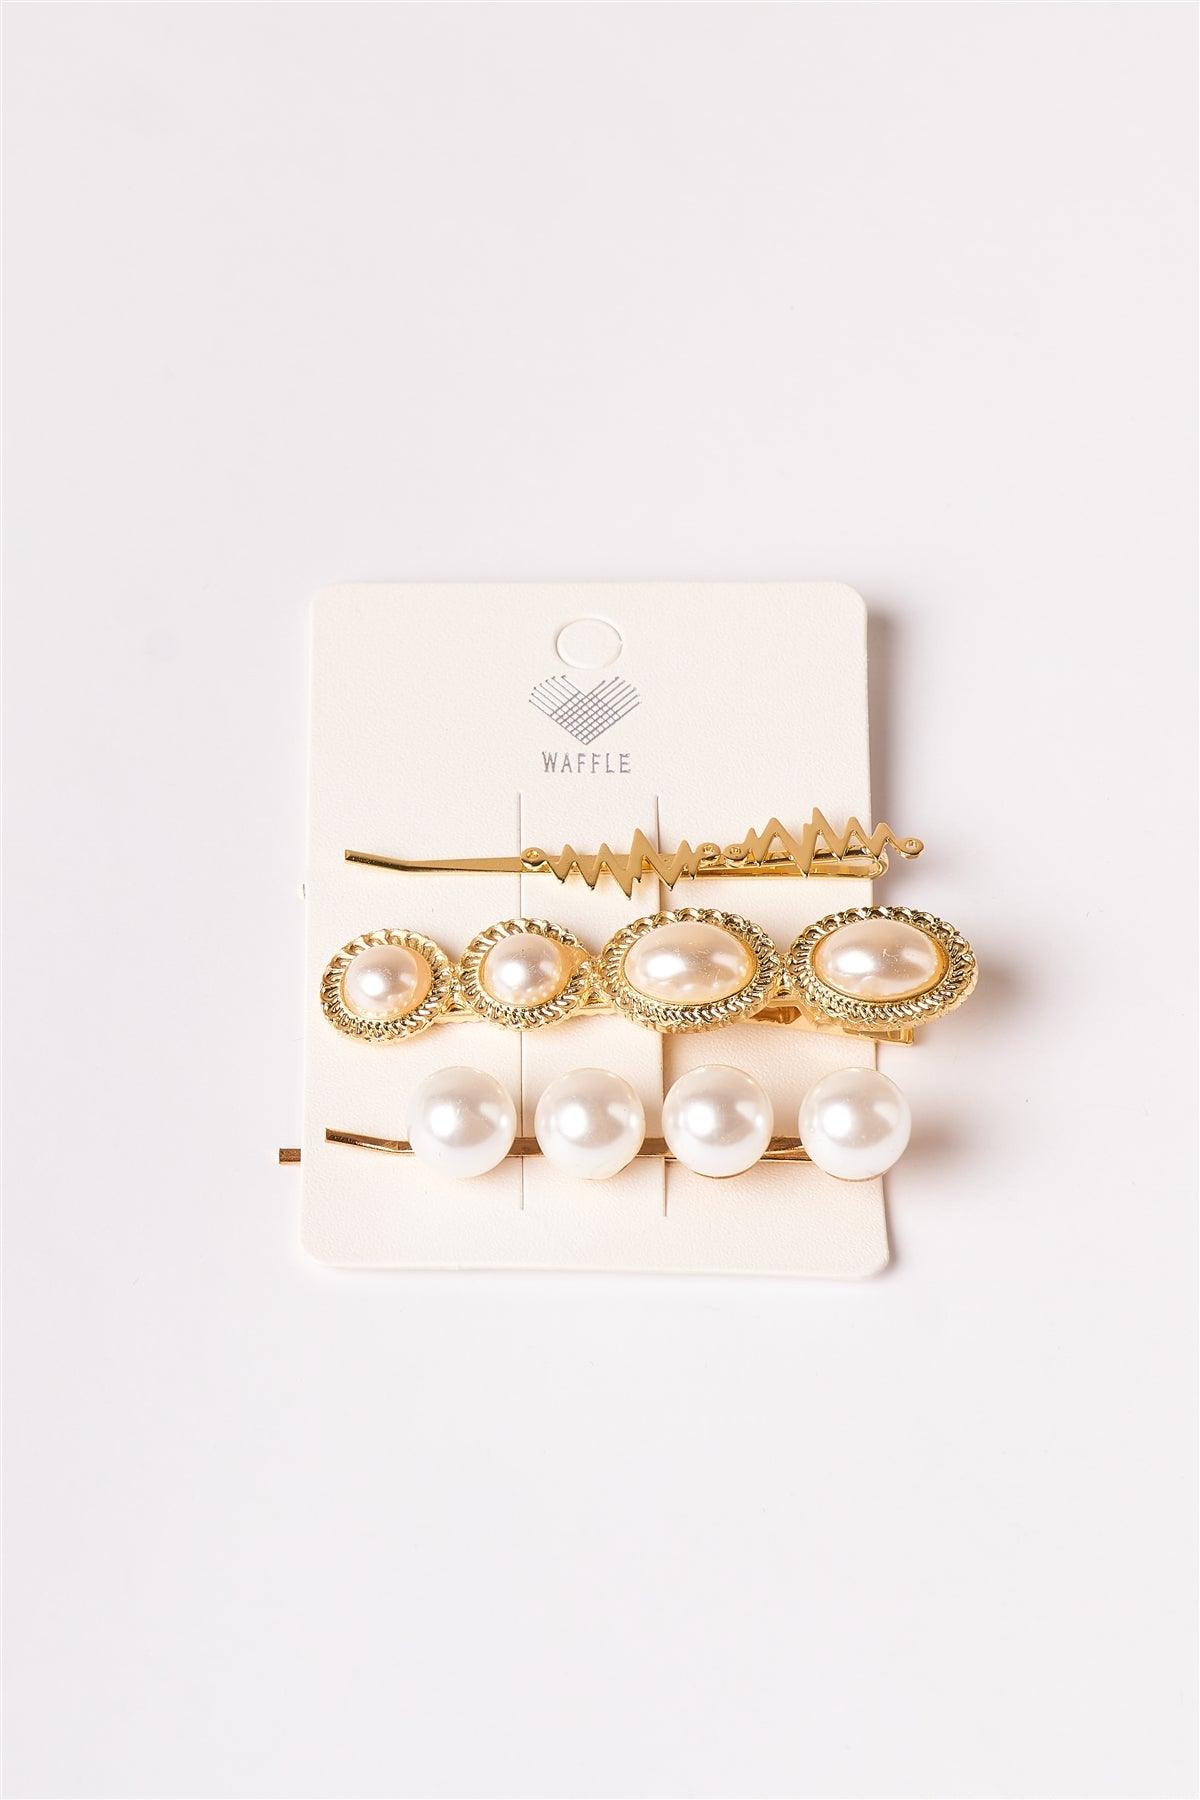 Gold Large Pearled Bobby Pins /12 Pack